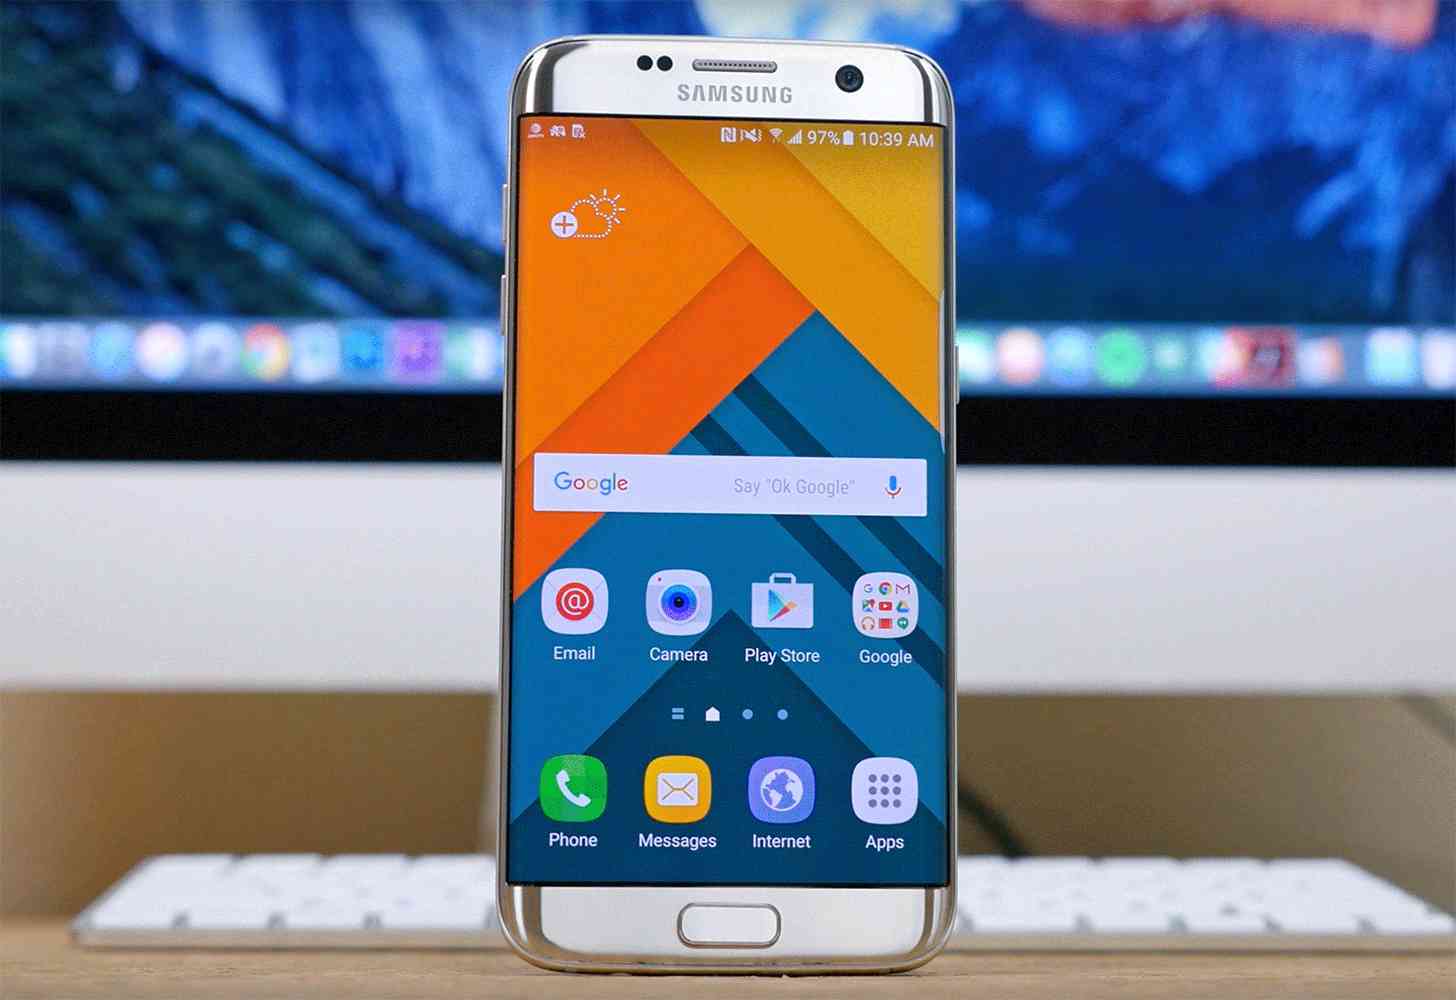 Samsung Galaxy S7 edge hands-on review